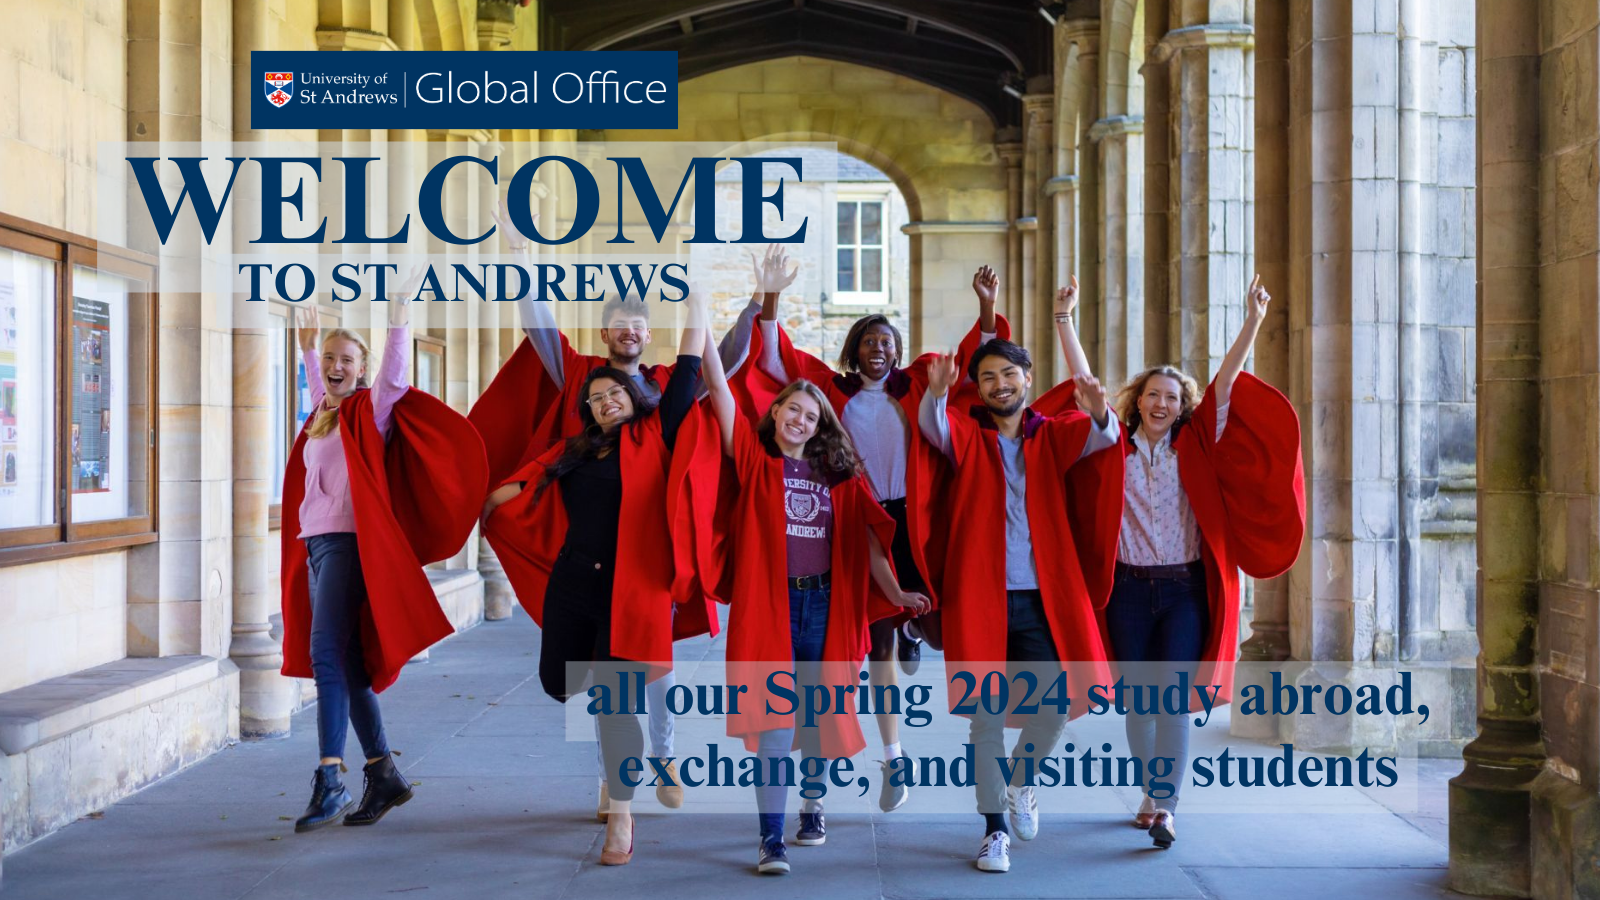 Welcome to St Andrews all our Spring 2024 study abroad, exchange, and visiting students.